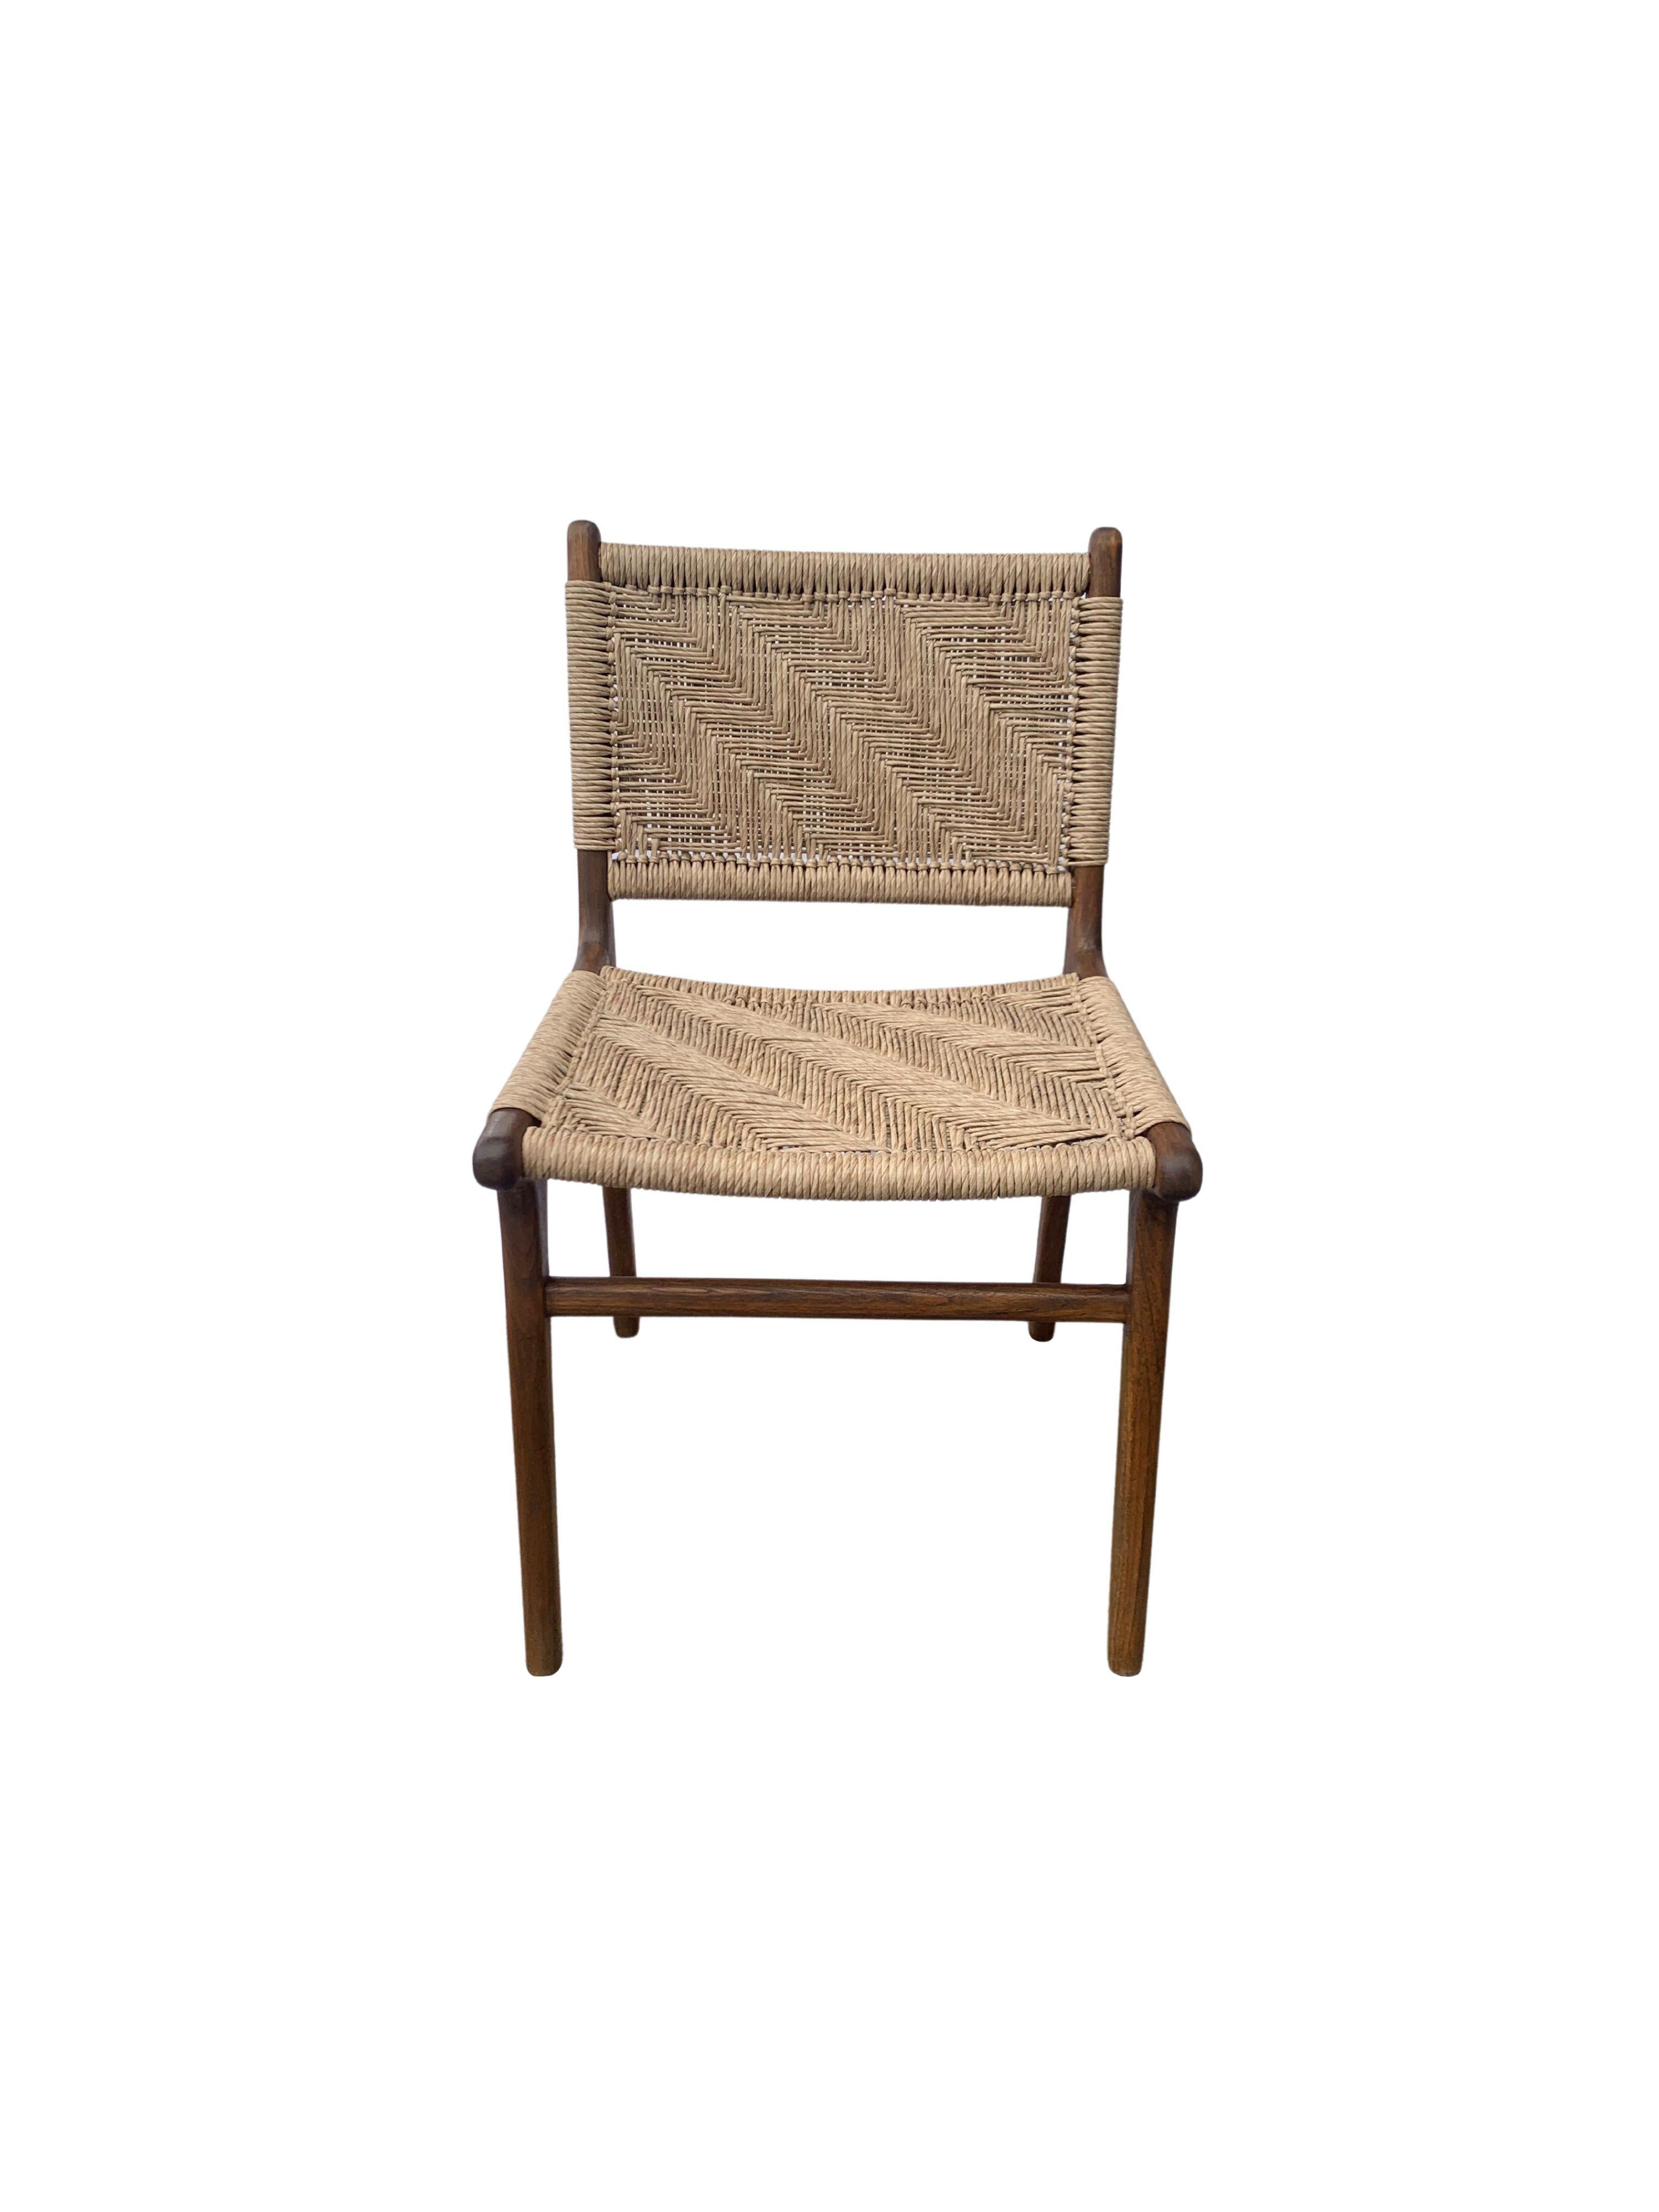 A hand-crafted teak framed & woven synthetic rattan chair. These chairs are crafted by local artisans using a wood joinery technique without the use of nails. They feature a subtle wood texture and are robust and sturdy. Synthetic rattan is more low